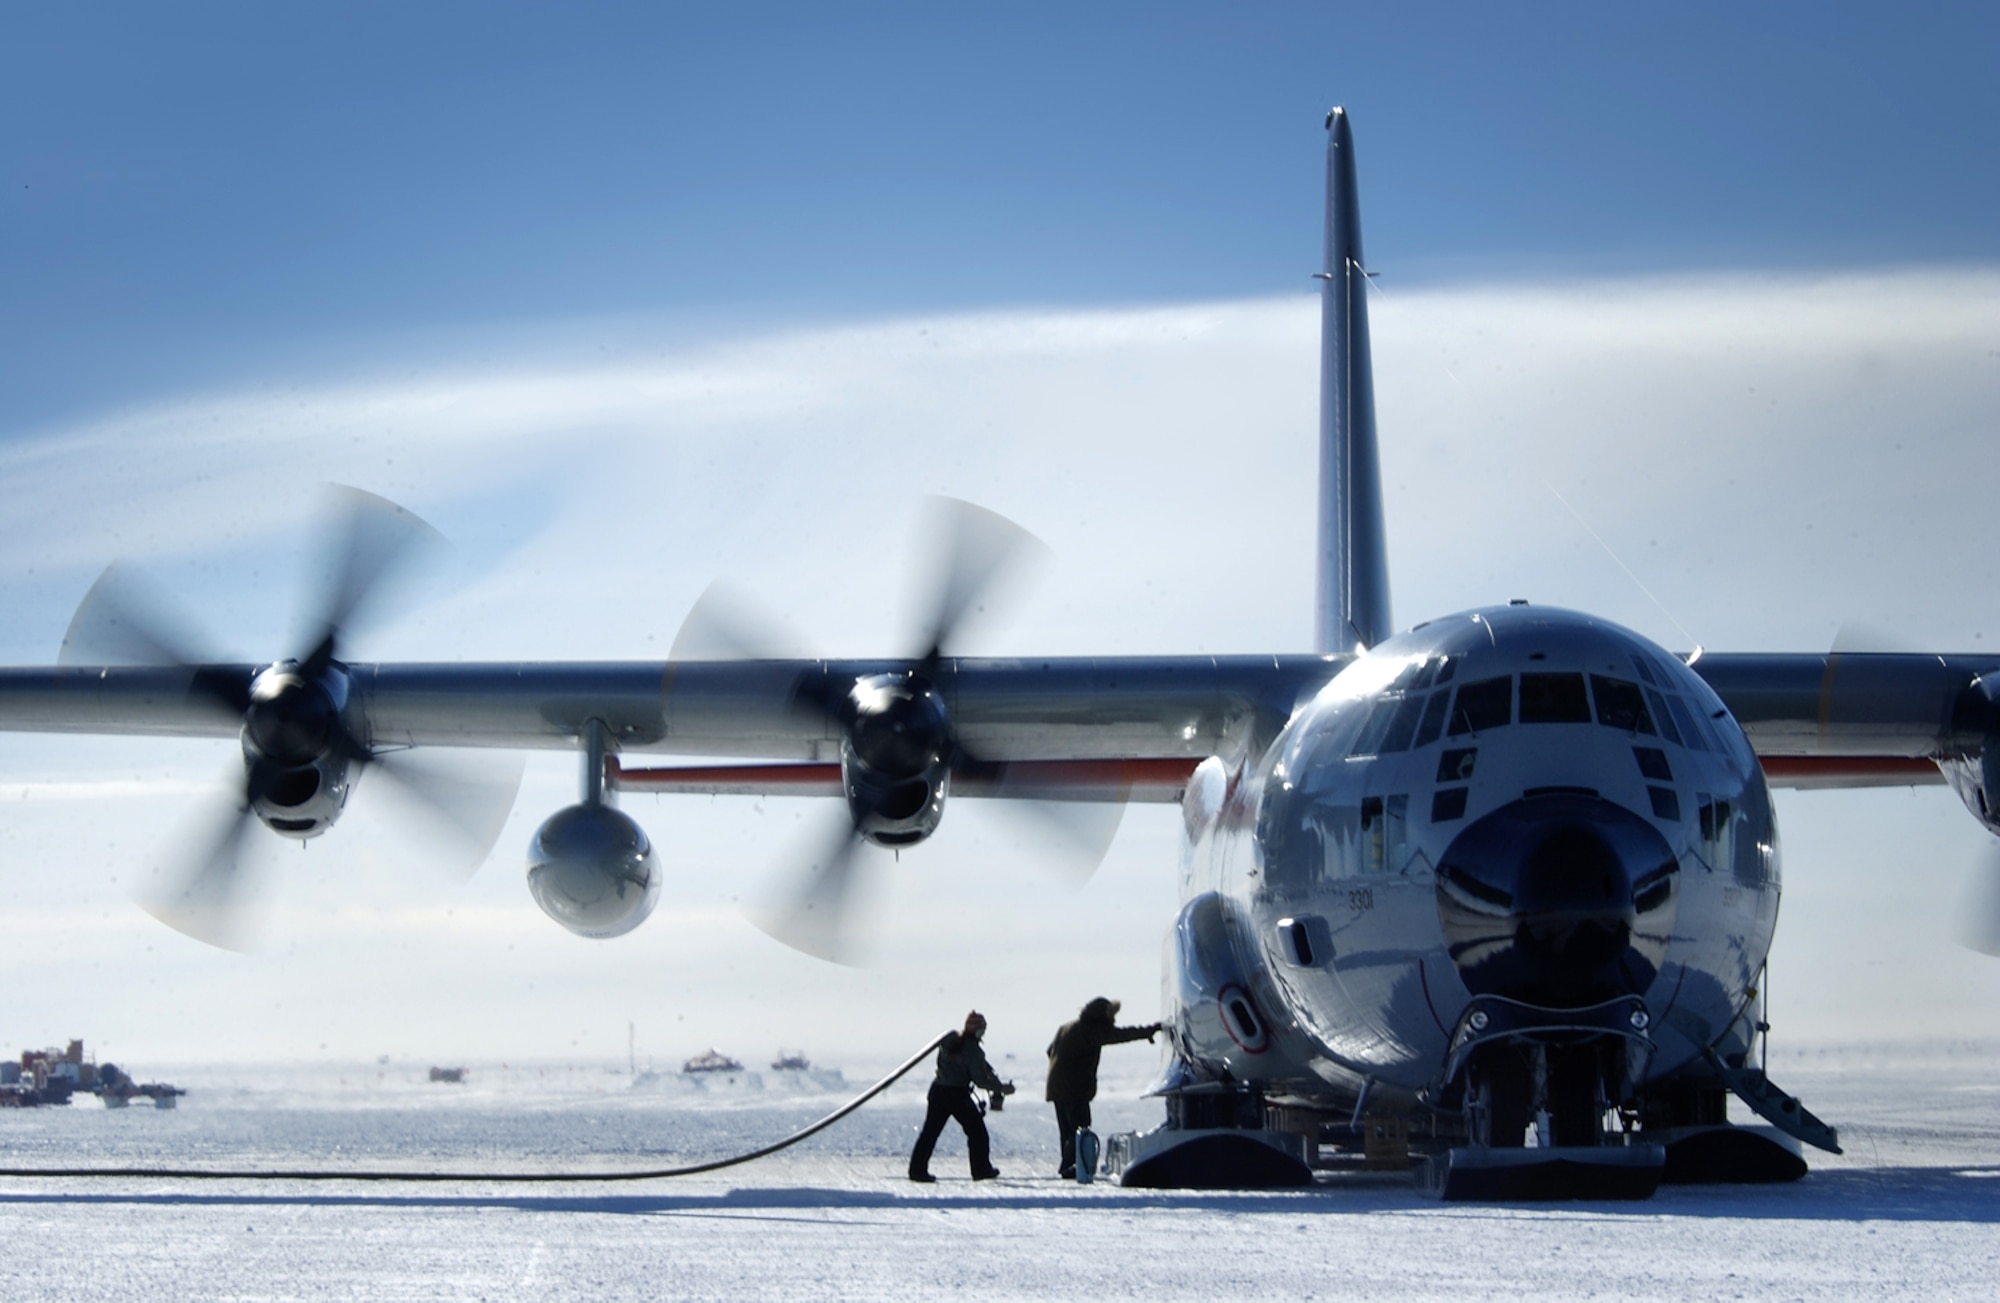 A New York Air National Guard LC-130 Hercules sits while crews unload fuel and cargo here during a mission to Antartica in 2005. A LC-130 arrived Oct. 17 at Hickam Air Force Base, Hawaii, en route to its first Operation Deep Freeze mission for the year. The LC-130 is equipped with ski-landing gear that allows the aircraft to land on ice or snow while airlifting supplies to remote locations throughout the Antarctic continent.  (U.S. Air Force photo/Master Sgt. Efrain Gonzalez)